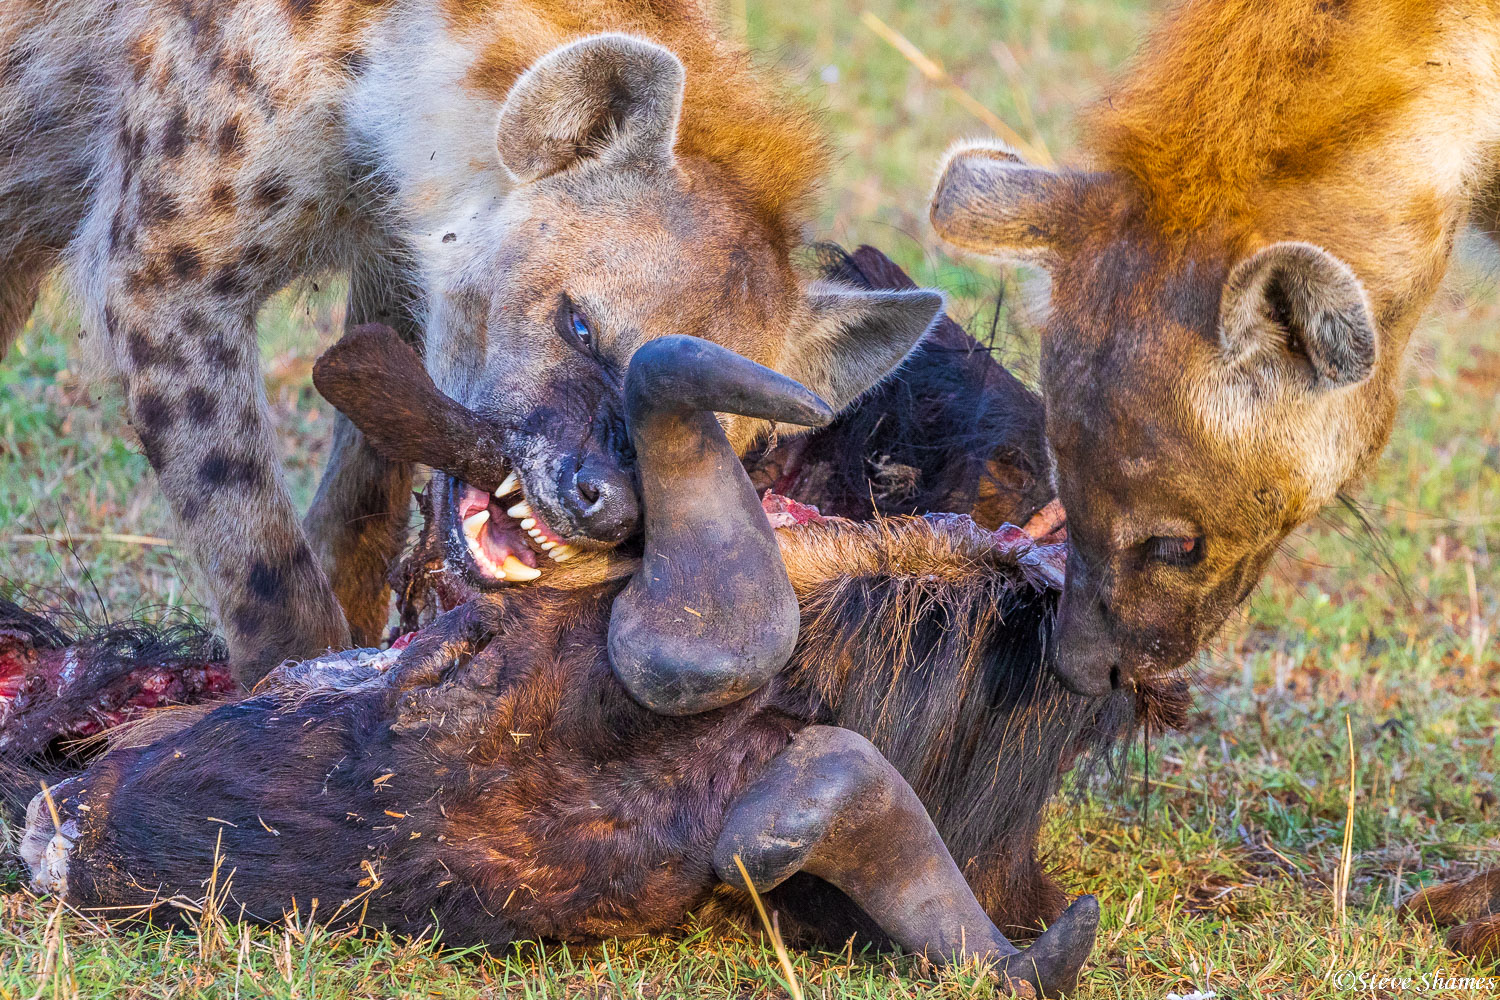 Hyena really baring its teeth while gnawing on a wildebeest.